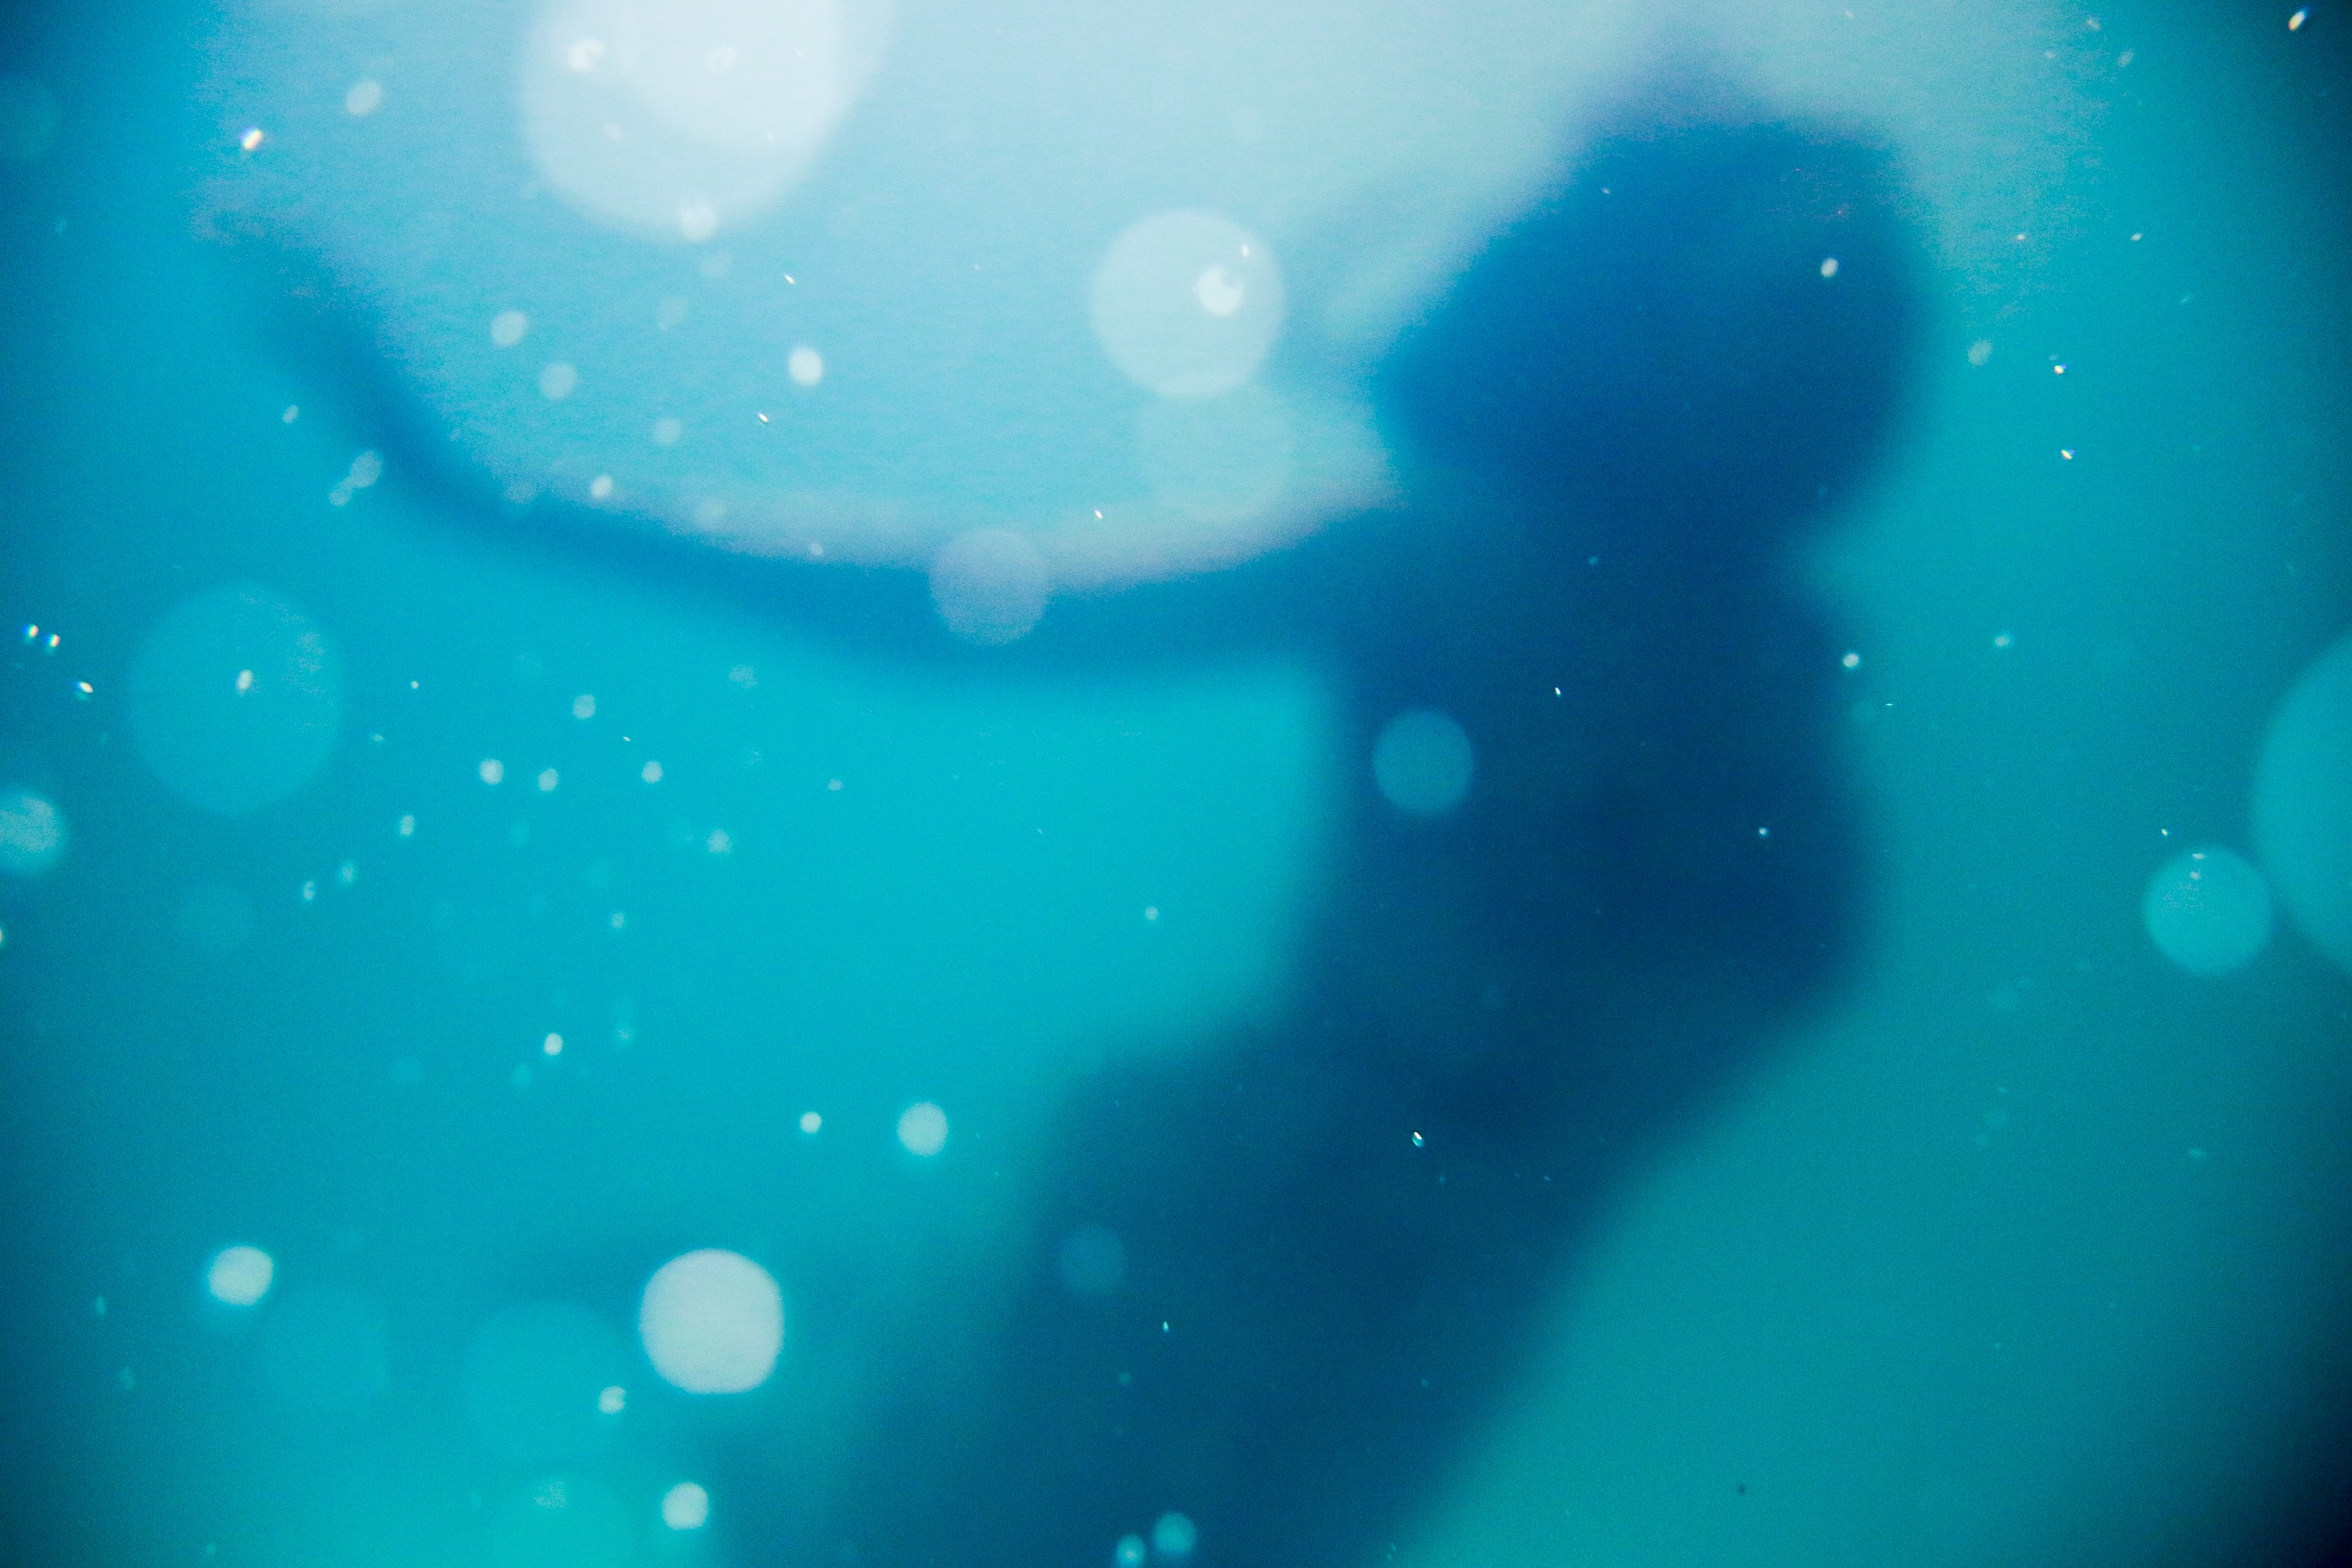 A silhouette of a woman under water. | Source: Unsplash